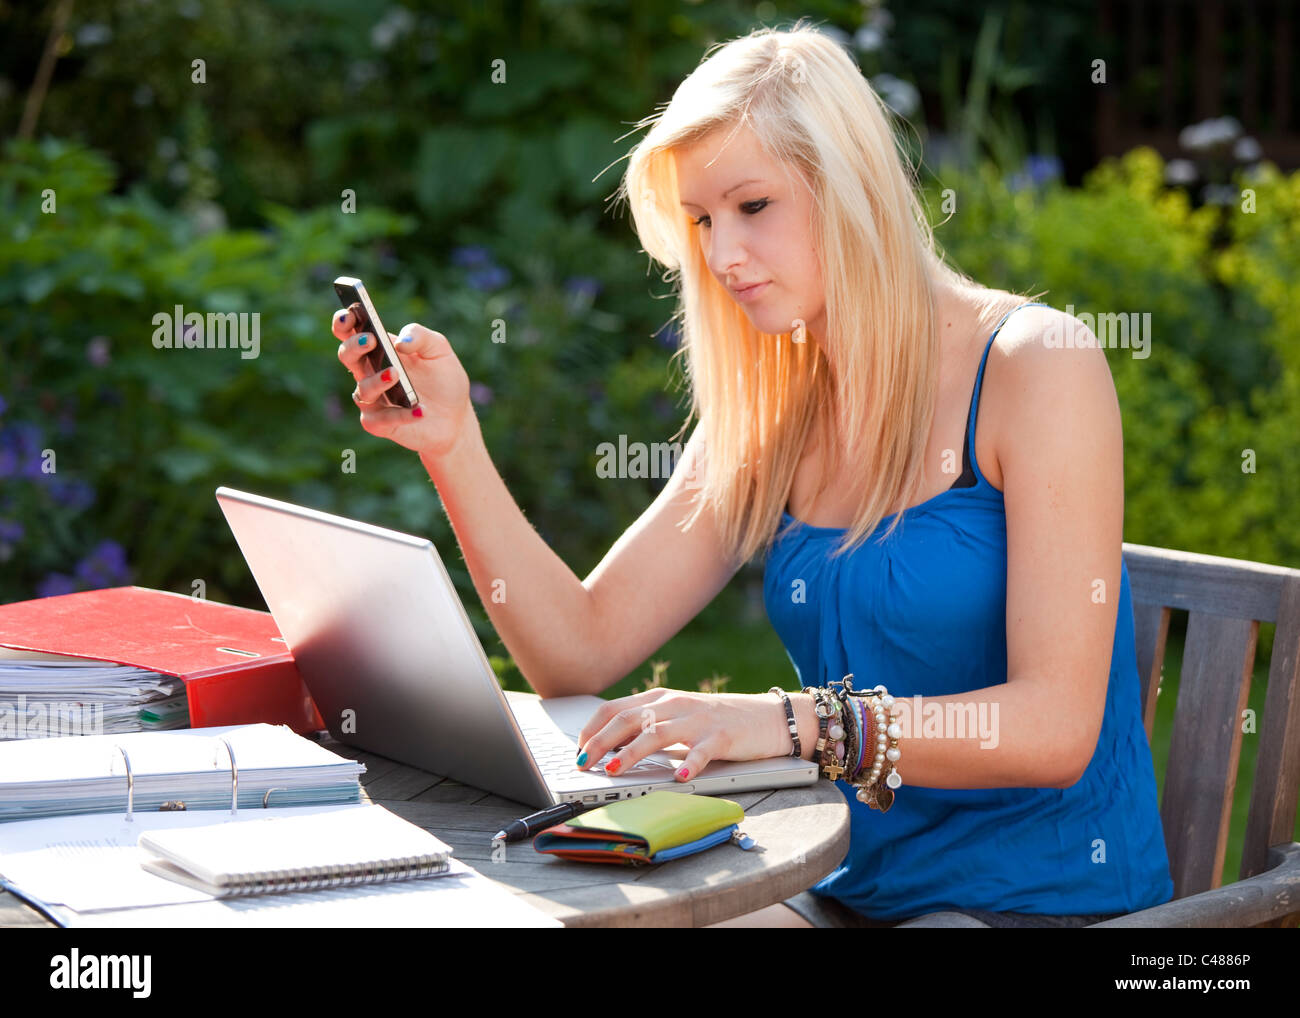 young girl texting on moblie phone while on laptop computer socializing outside in the garden Stock Photo